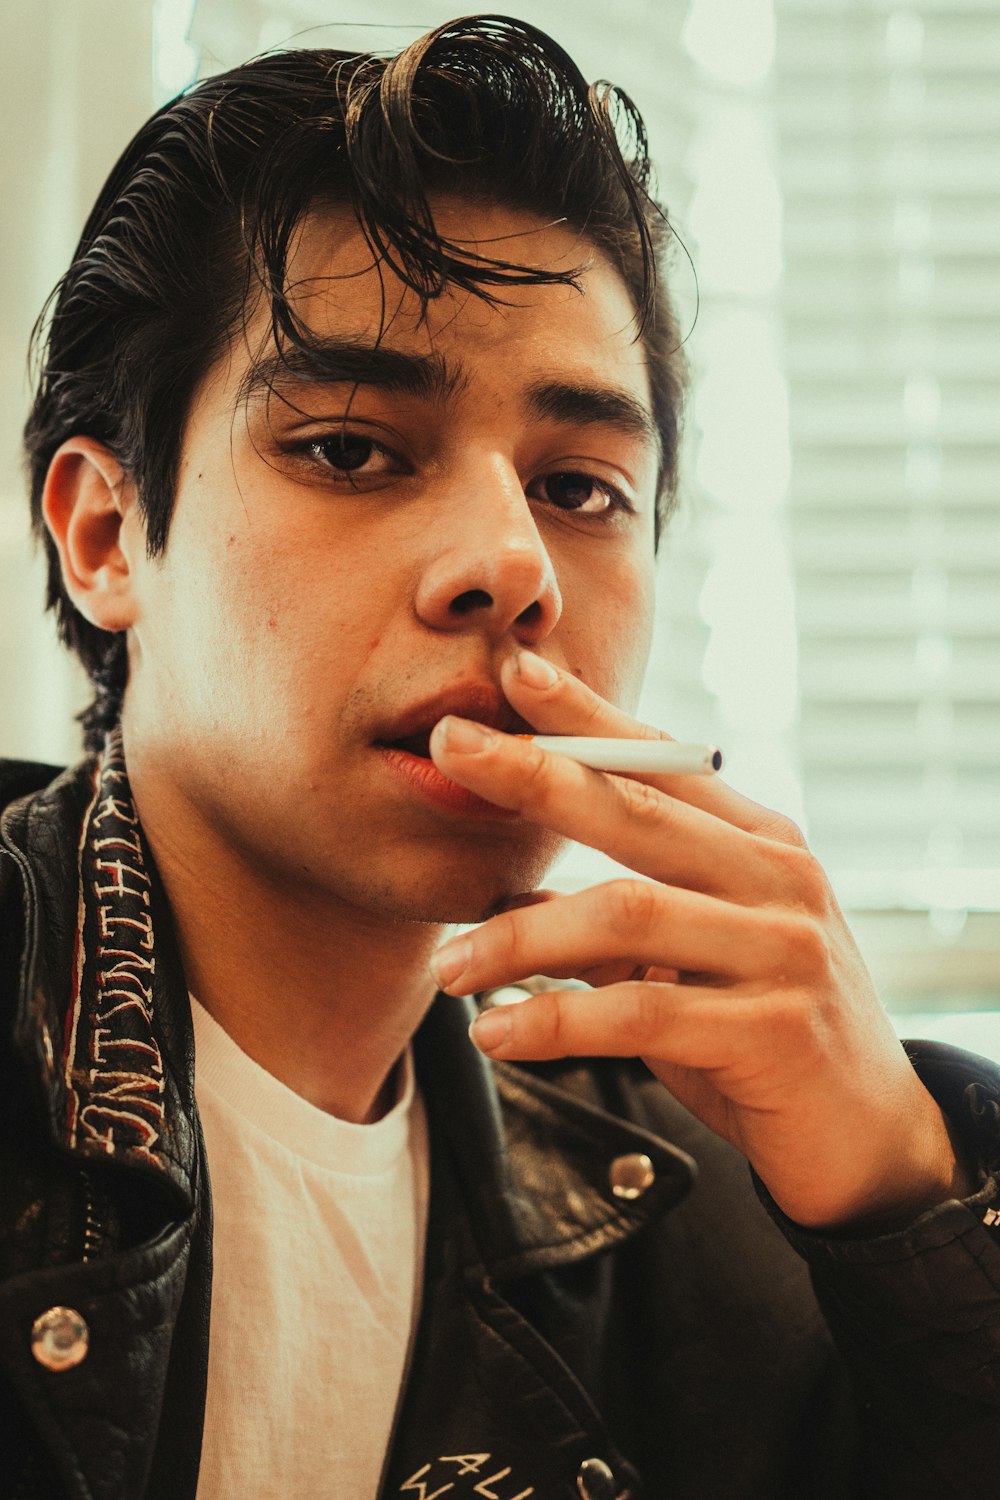 a young man smoking a cigarette in a room